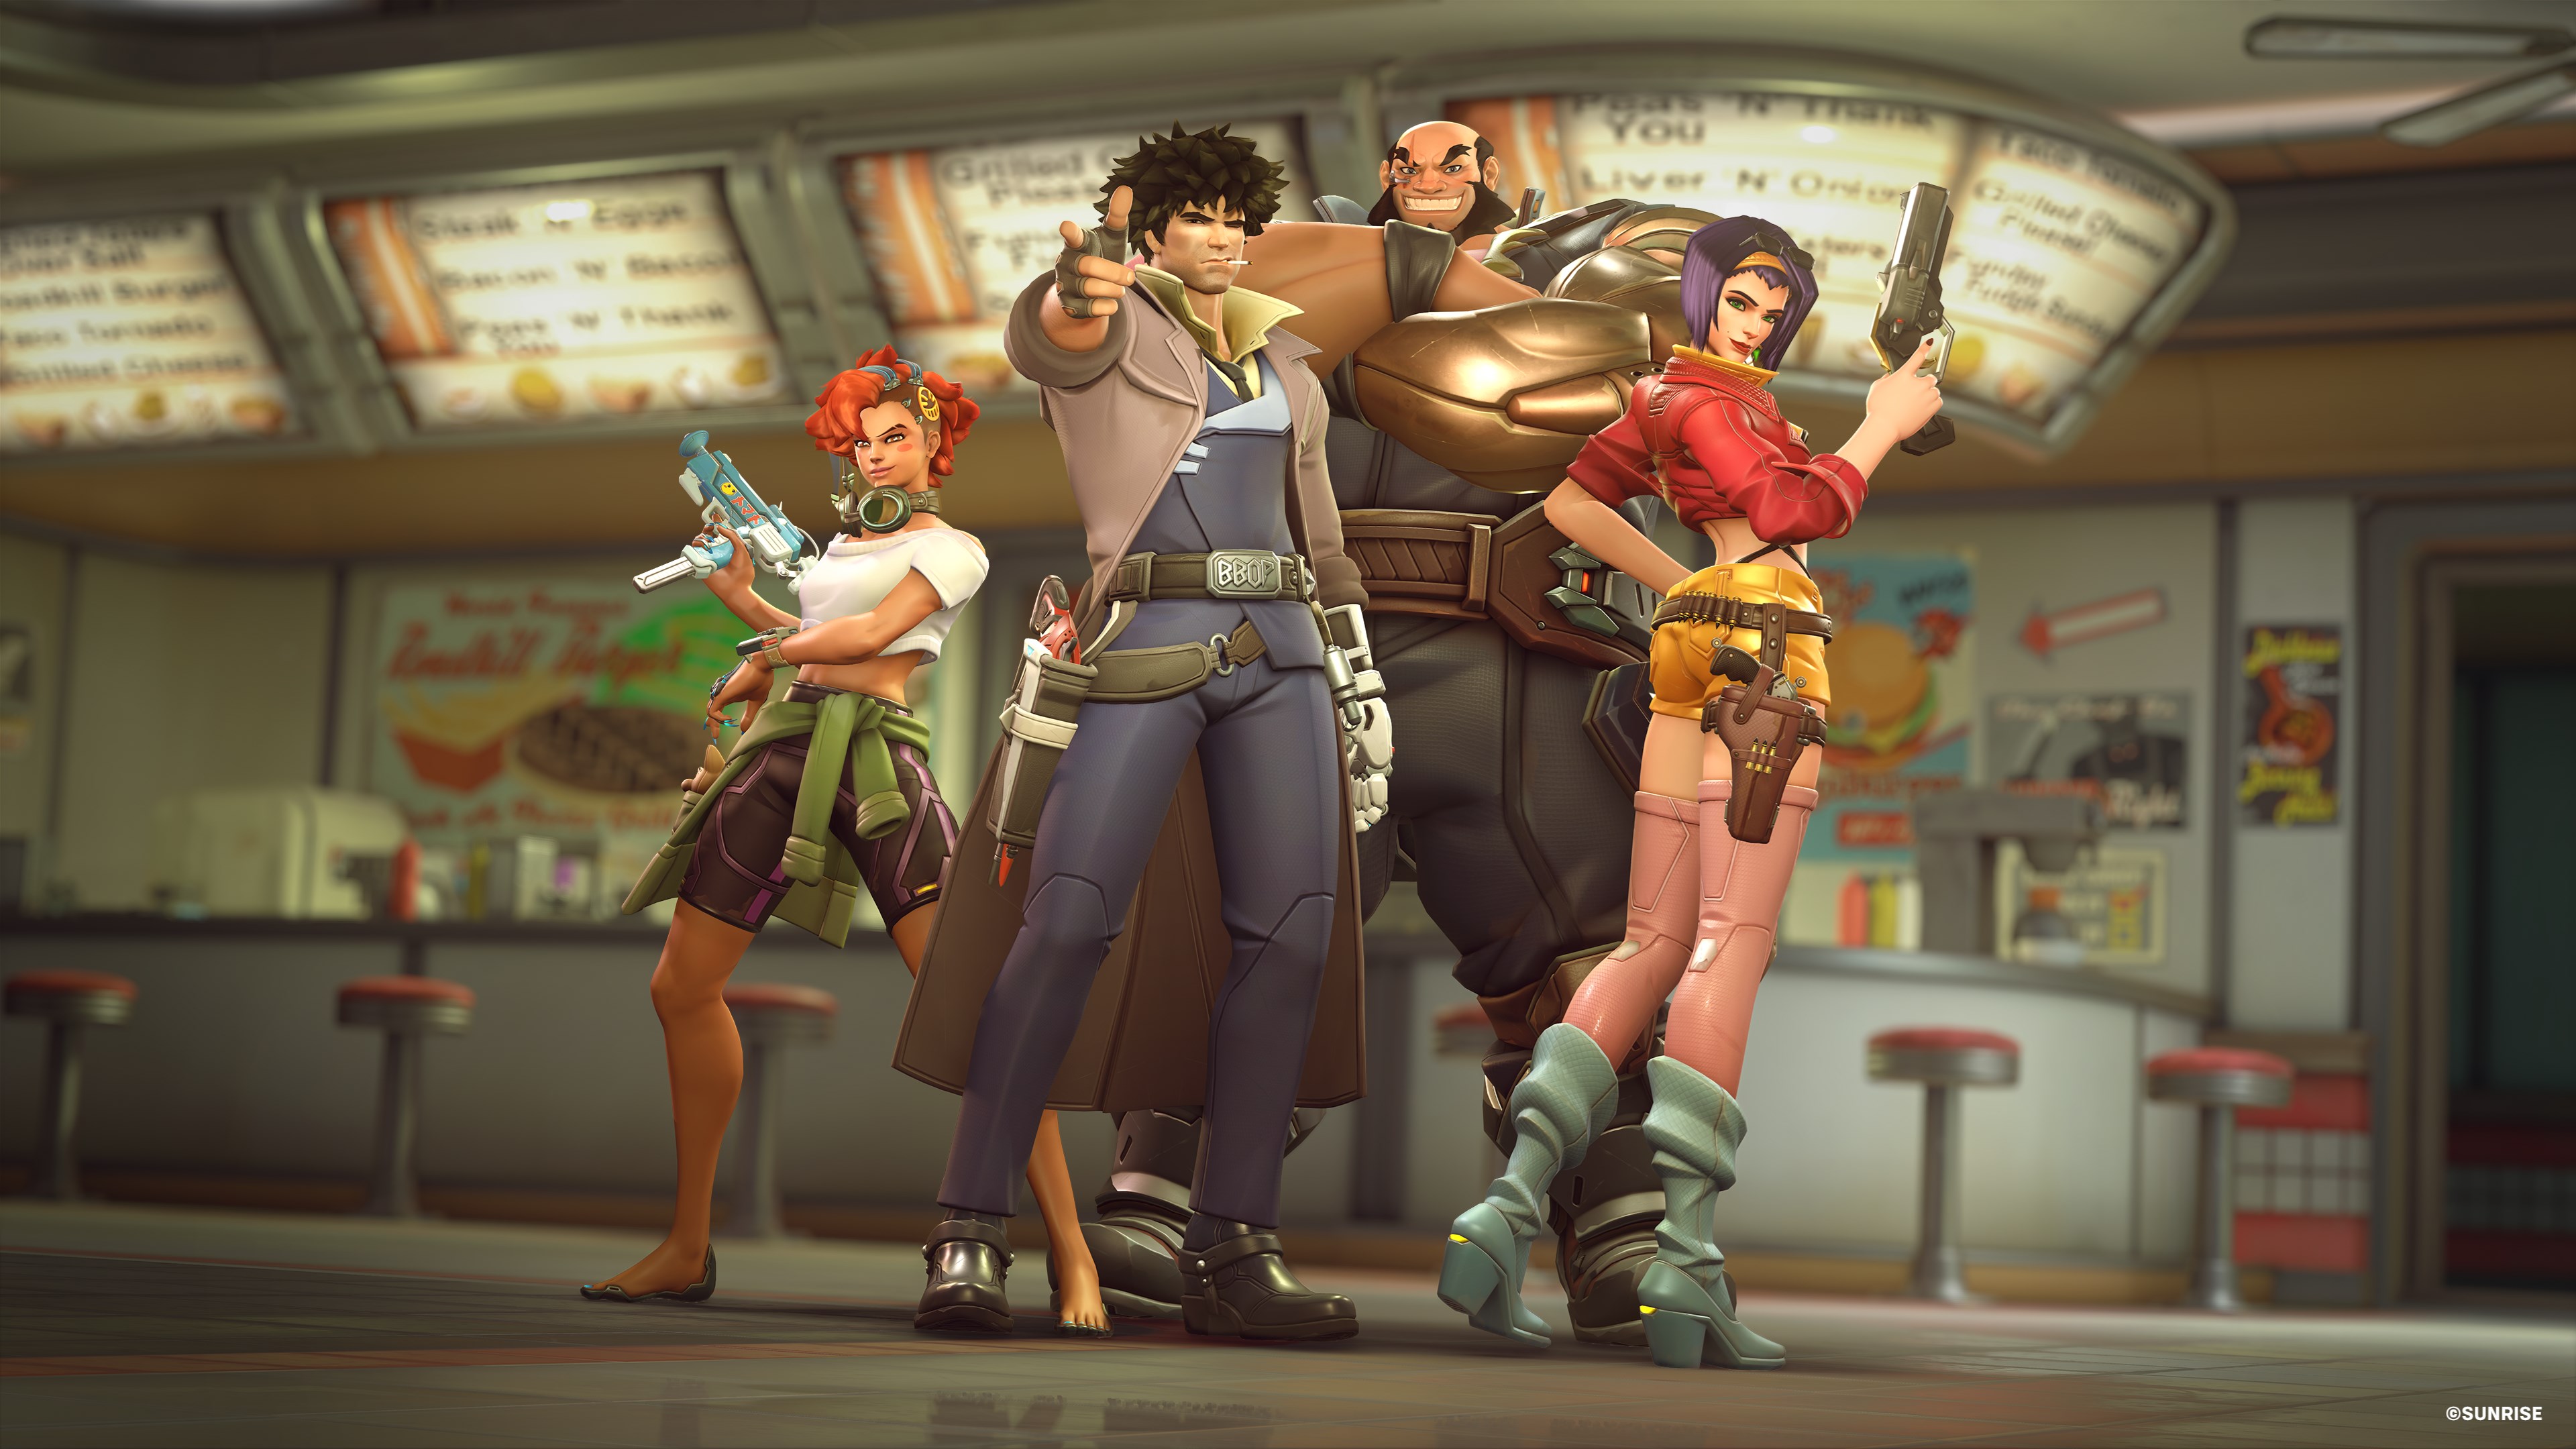 Overwatch heroes Sombra, Cassidy, Mauga, and Ashe as Cowboy Bebop characters Ed, Spike Spiegel, Jet Black, and Faye Valentine, hanging out in the Route 66 restaurant lobby area